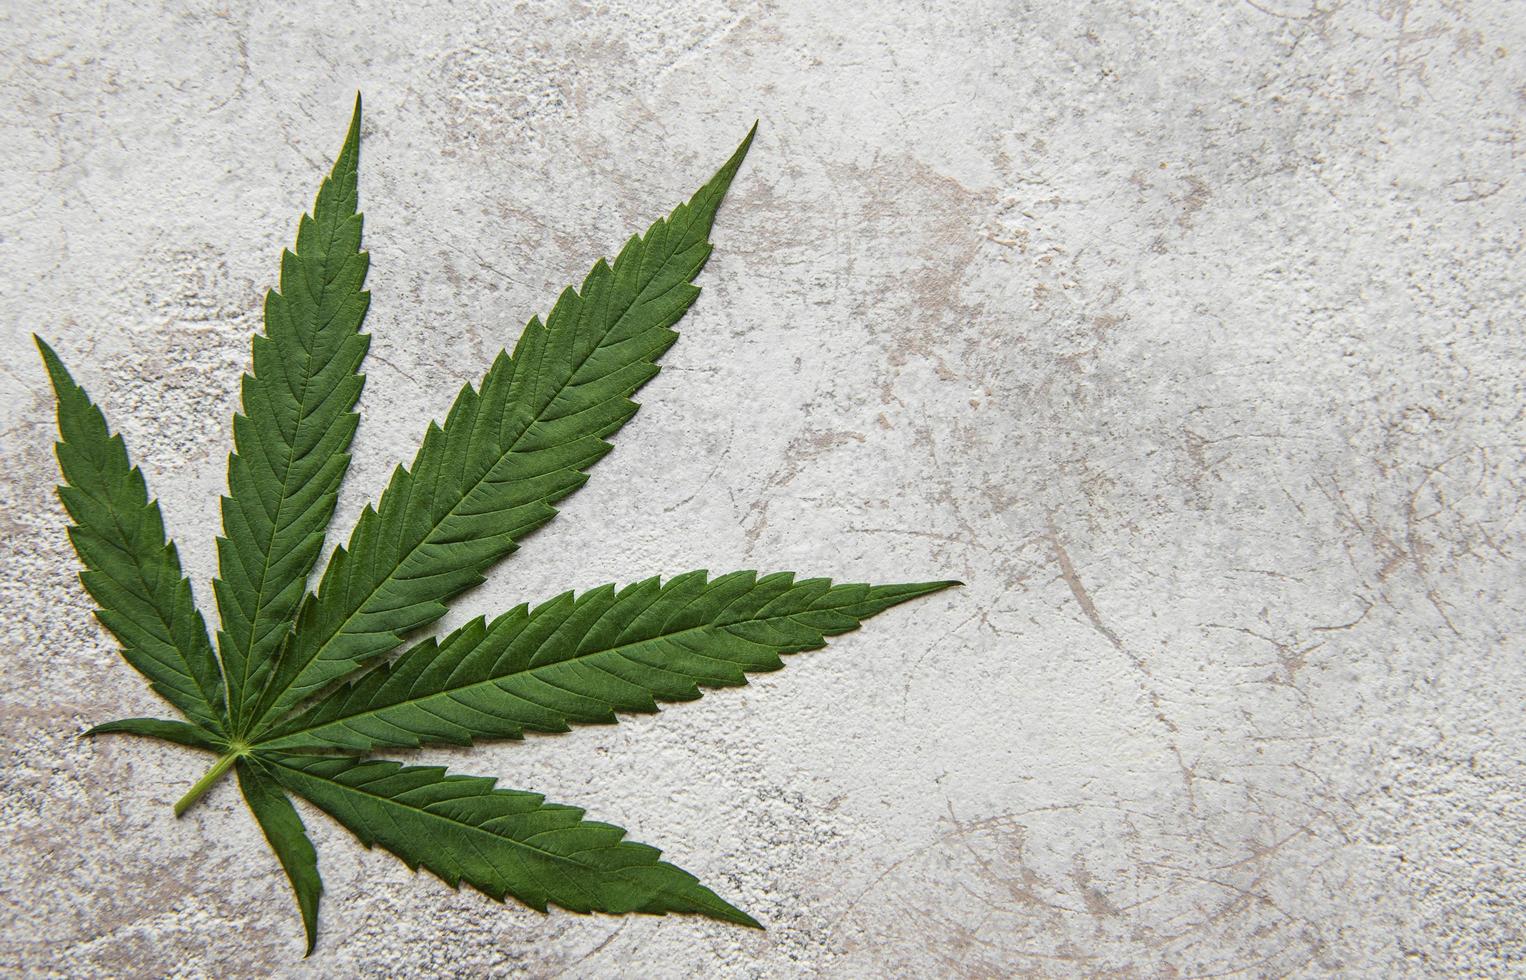 Green cannabis leaves on concrete background photo